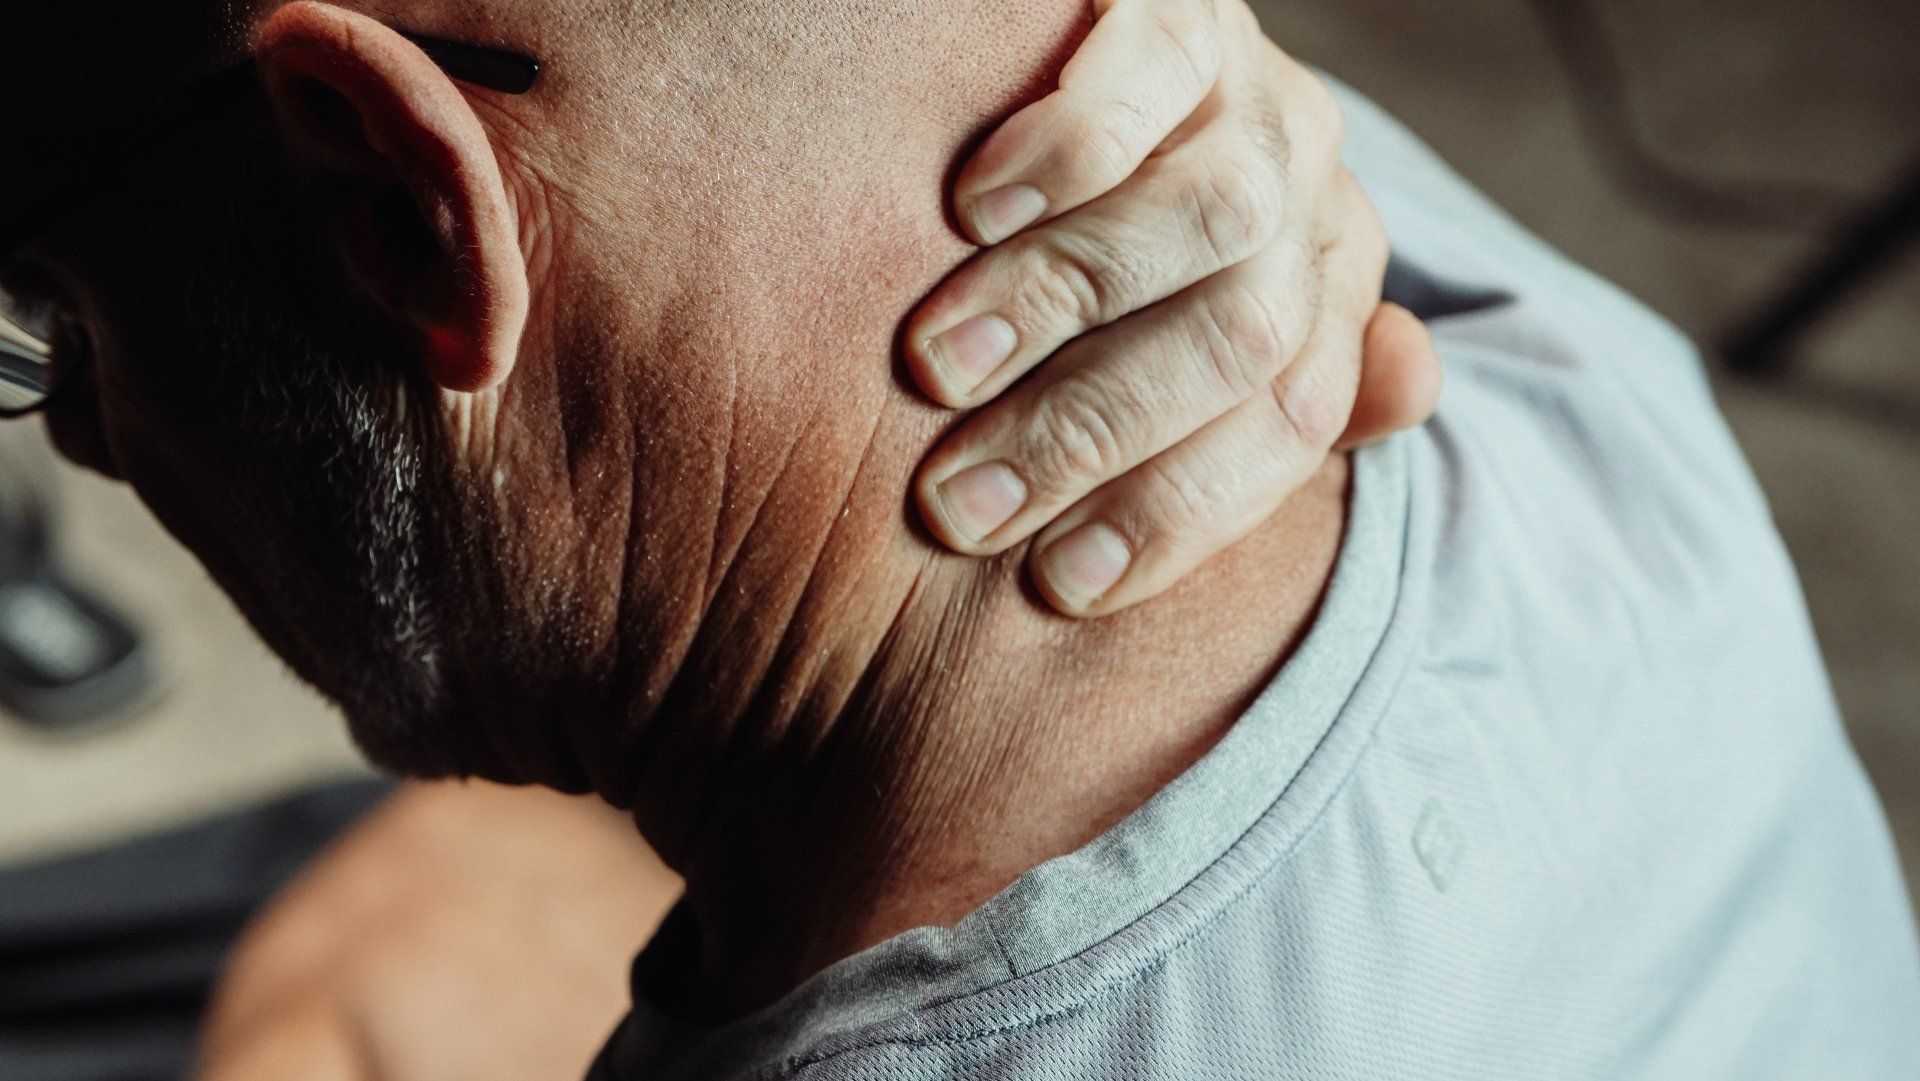 Neuromuscular skeletal pain | Somerset, WI | Defined Spine Chiropractic + Wellness